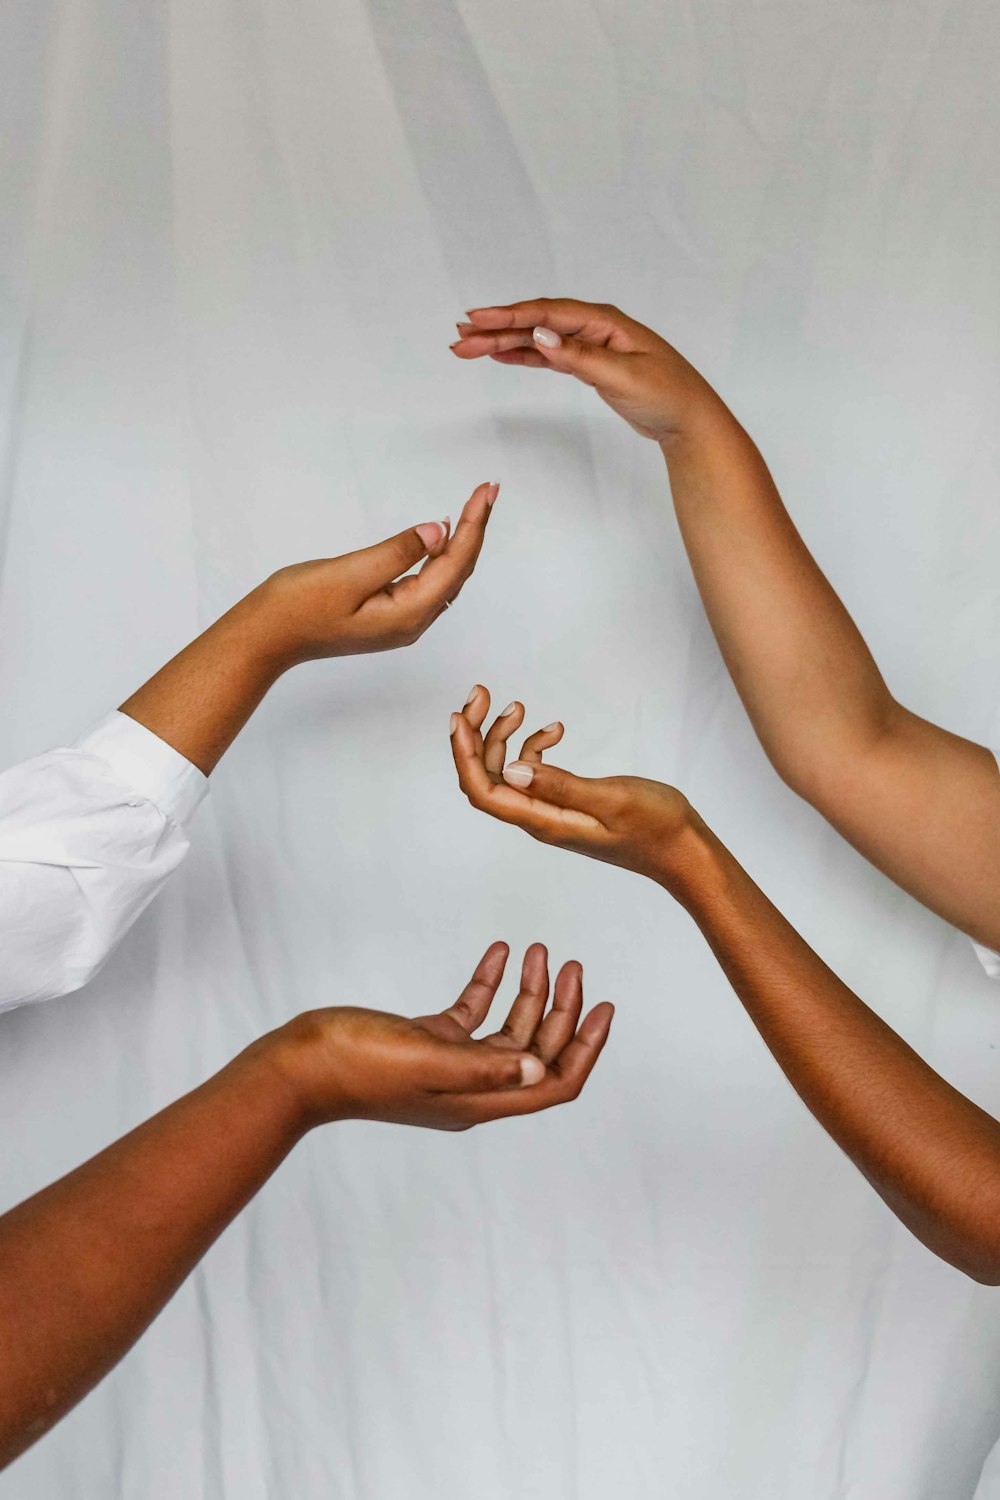 a group of hands reaching out towards each other